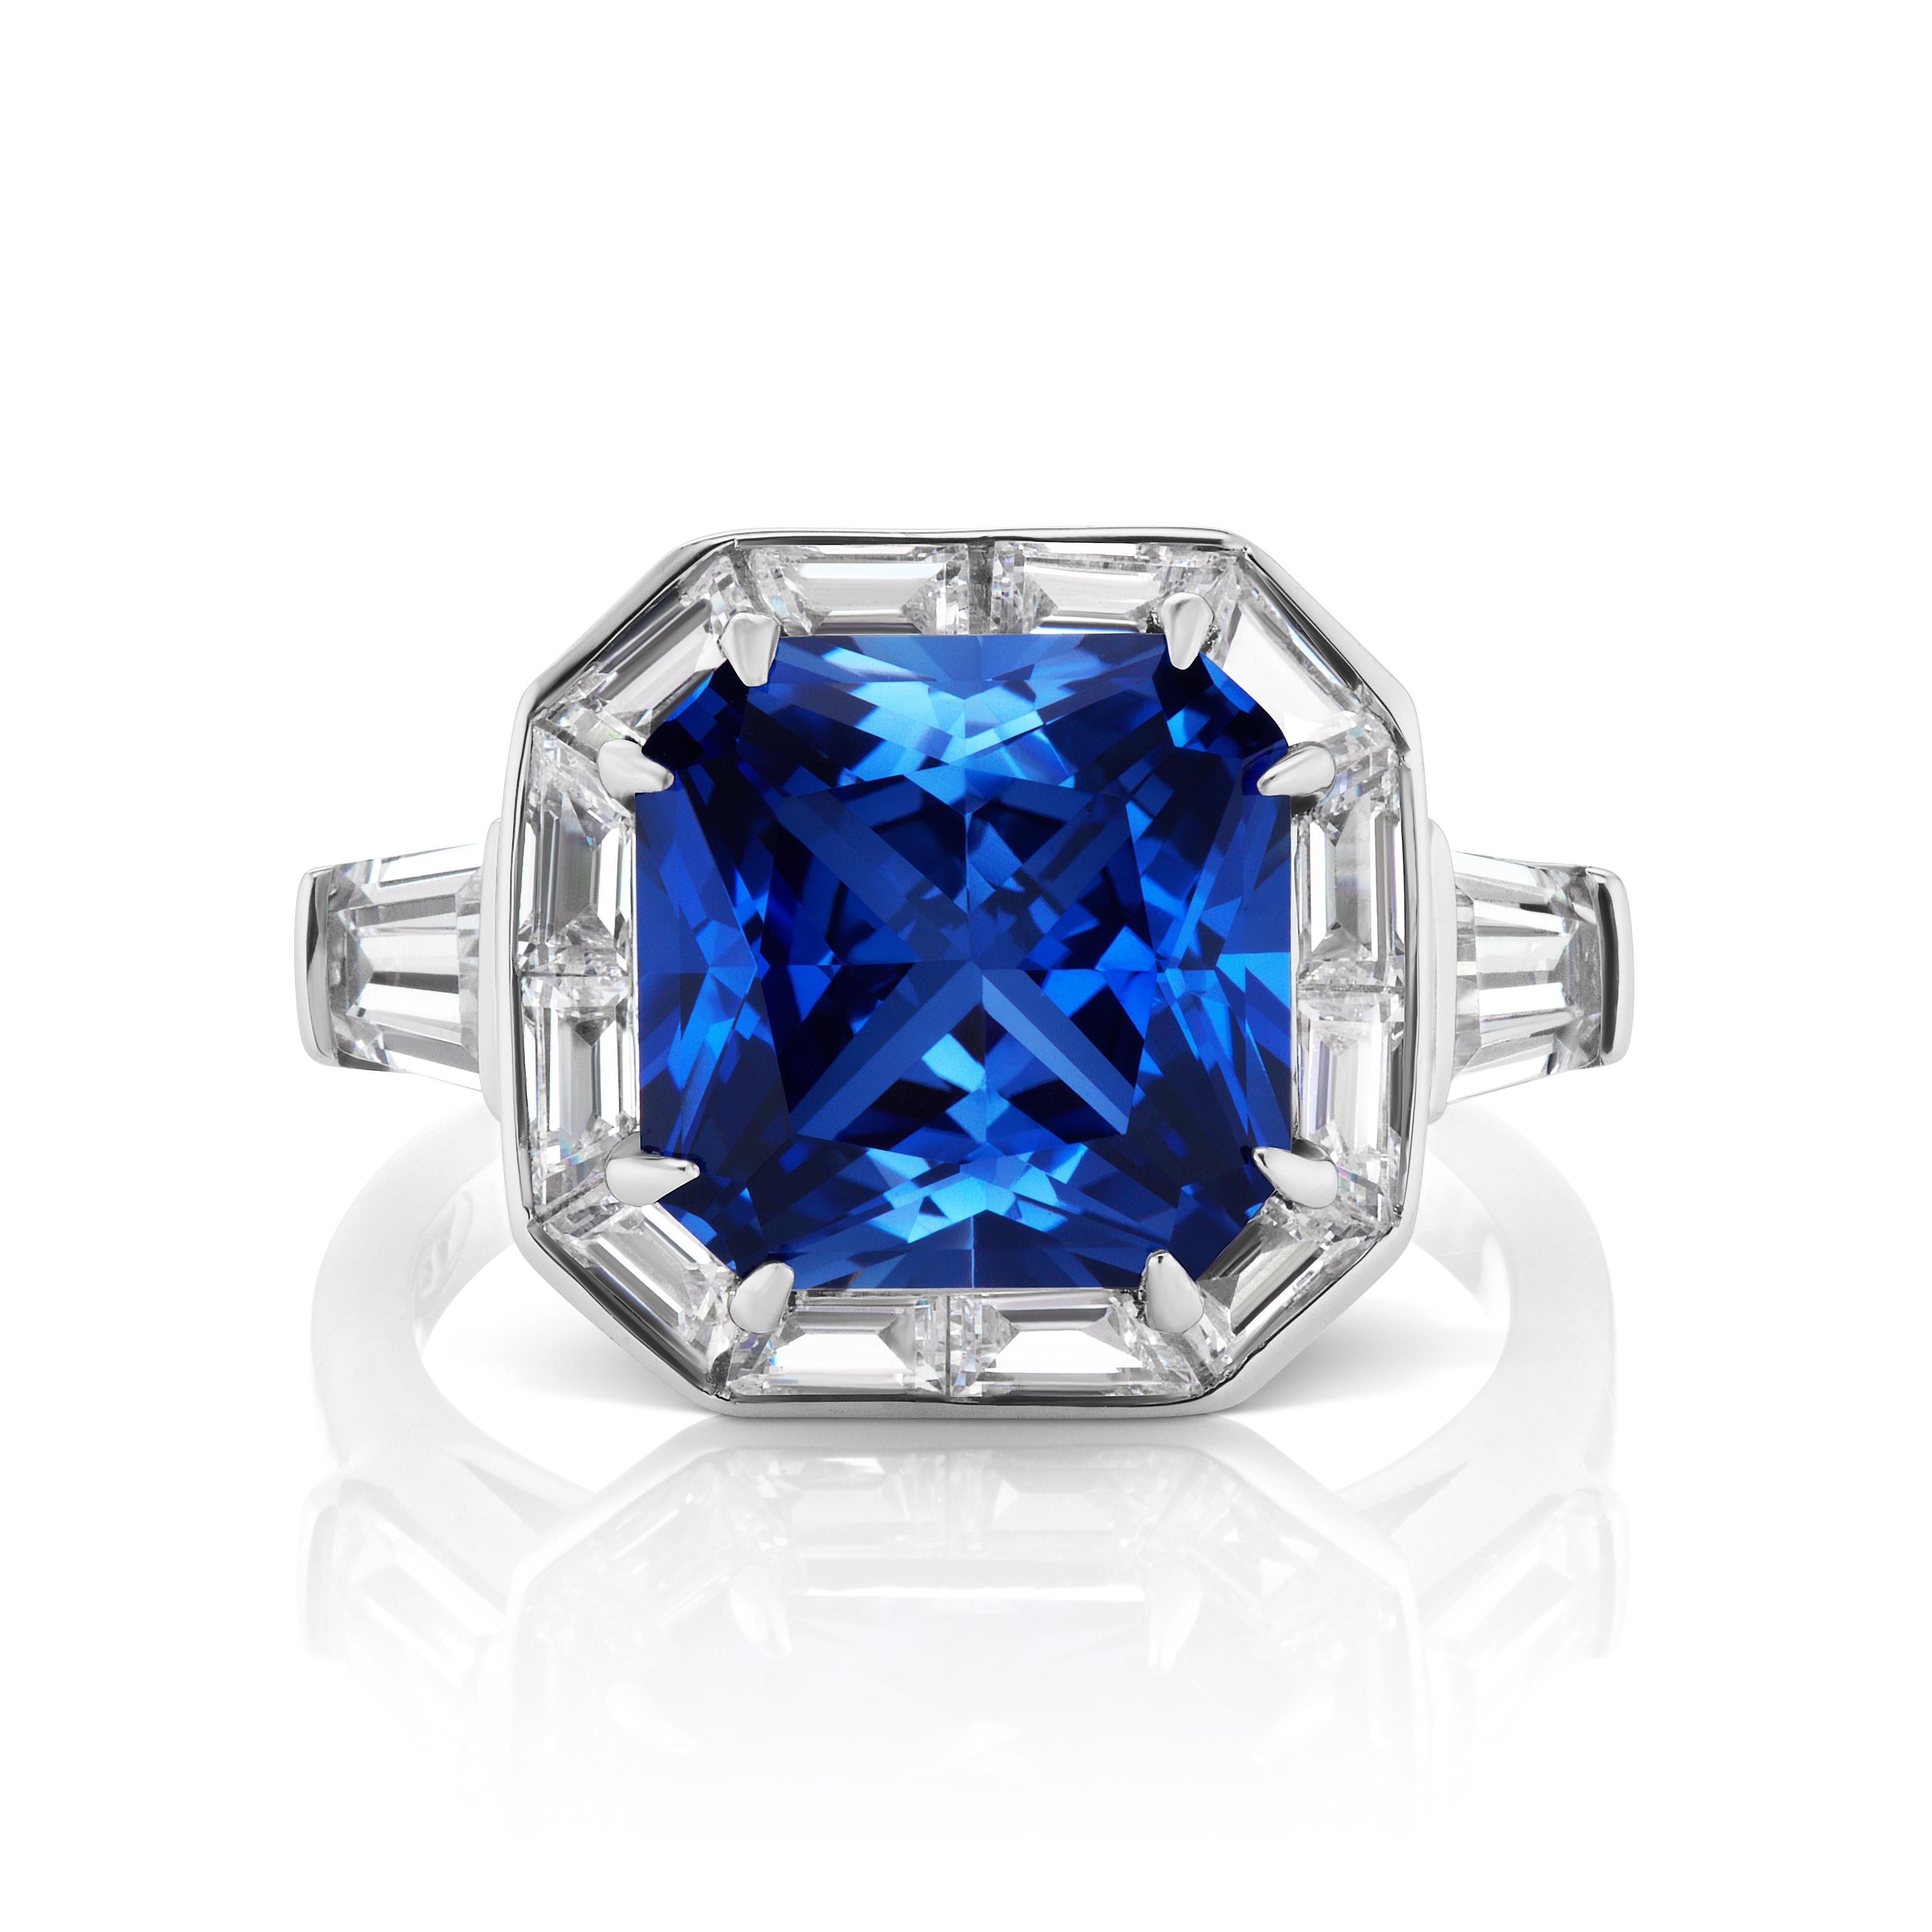 Magnificent Costume Jewelry Art Deco Style Square Man-Made Sapphire Cubic Zirconia Diamond Halo Style Silver Ring Bordered with Cubic Zirconia Fancy-Cut Baguettes and Tapers on the Shank.  Center 'sapphire' looks a like a 5 carat, bright Ceylon. The